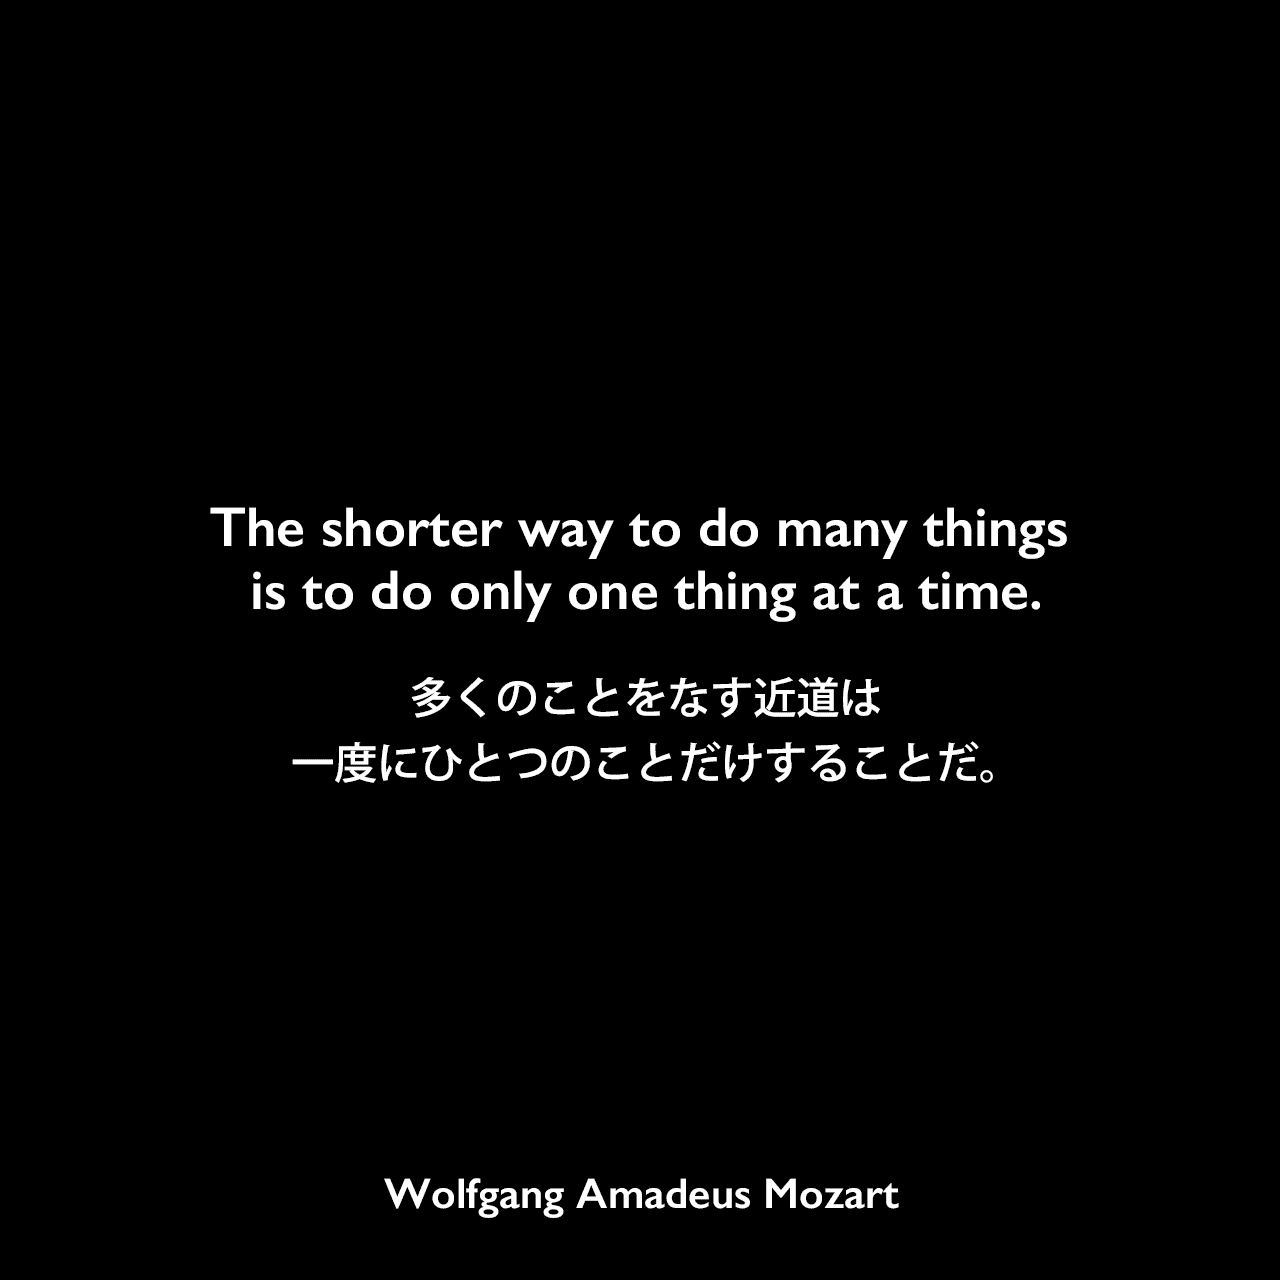 The shorter way to do many things is to do only one thing at a time.多くのことをなす近道は、一度にひとつのことだけすることだ。Wolfgang Amadeus Mozart